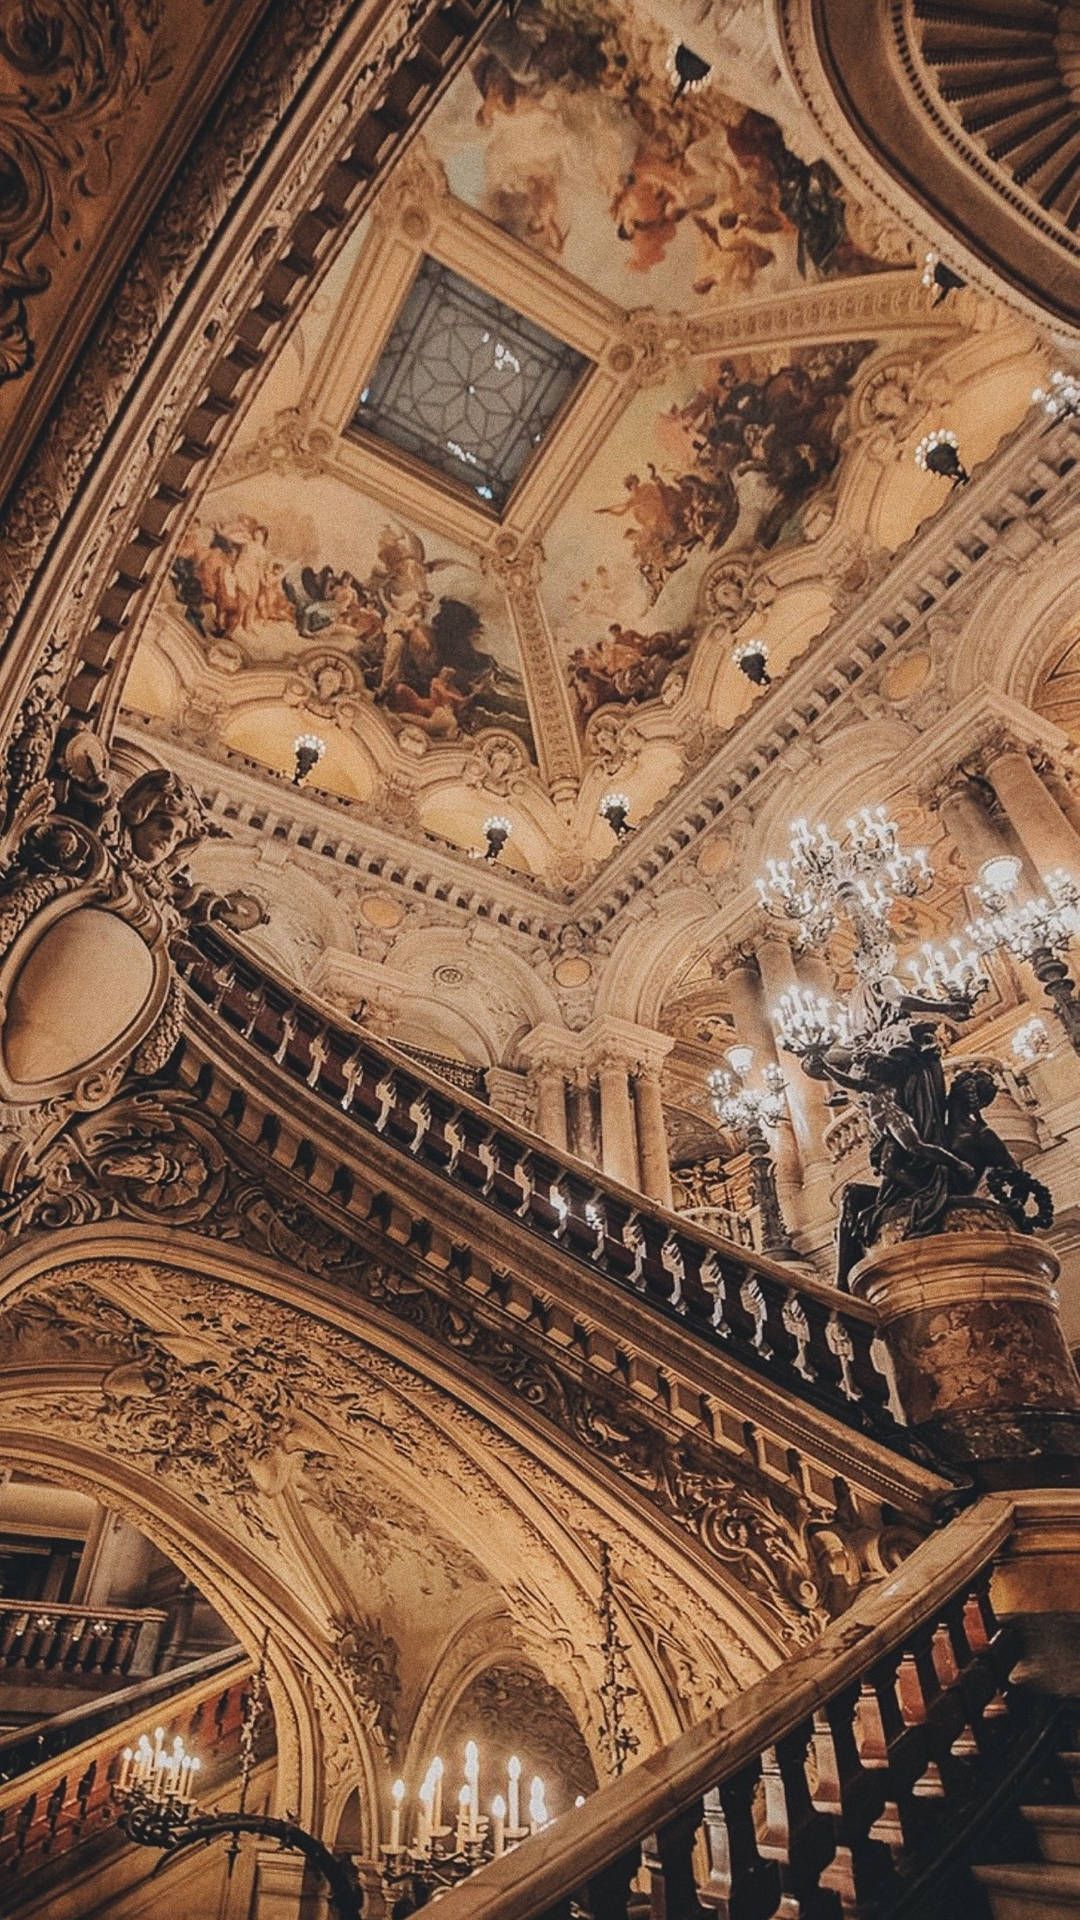 The ceiling of the grand staircase in the Paris Opera House - Light academia, architecture